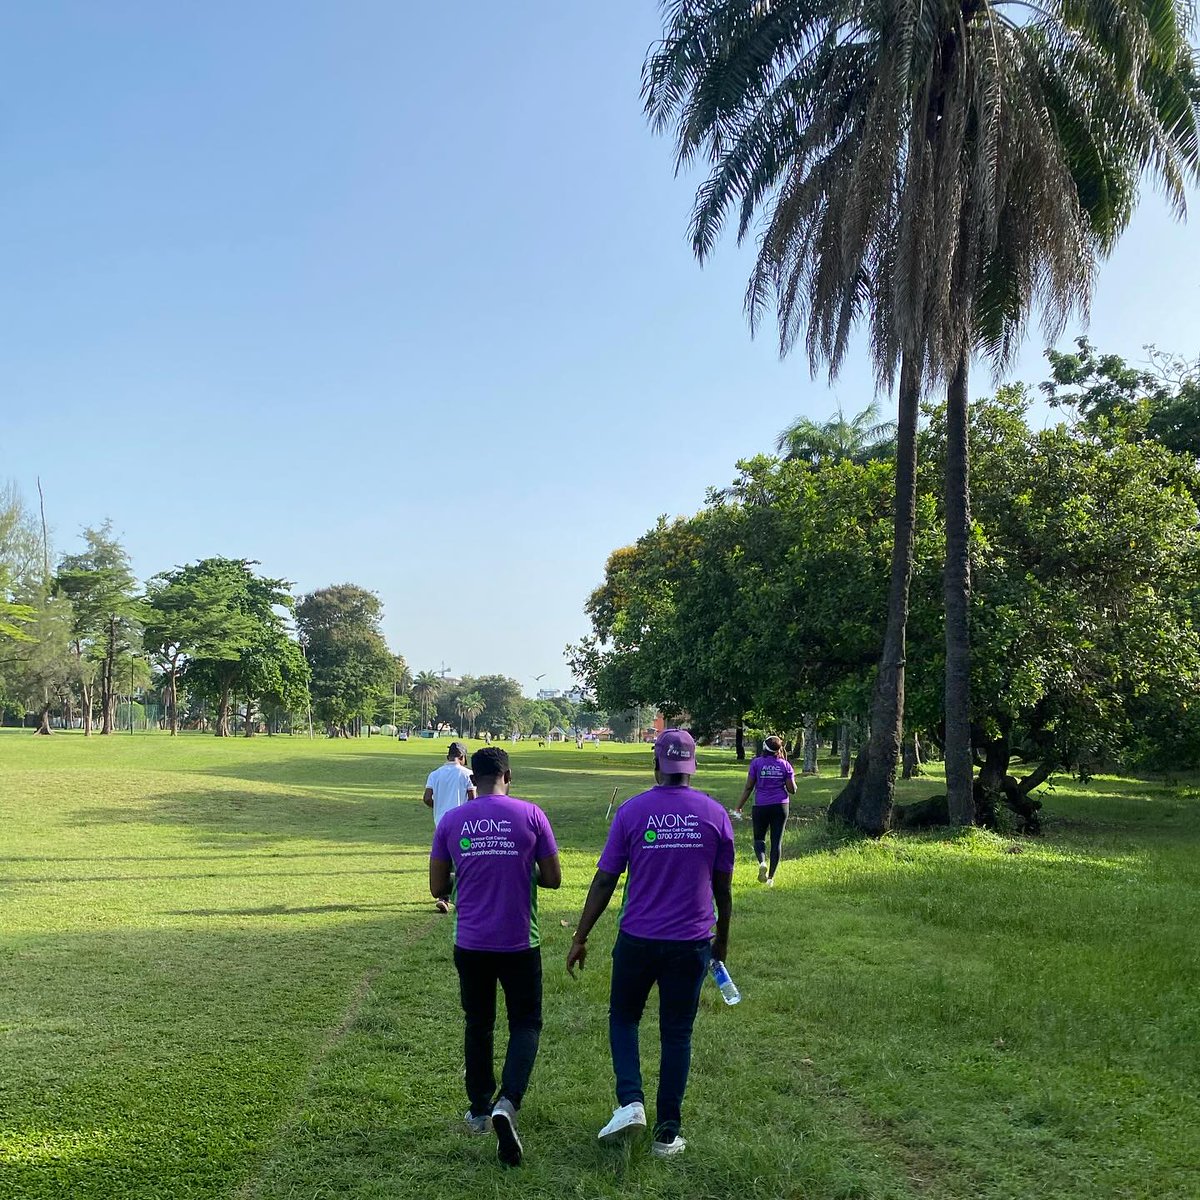 Setting up earlier today. Wherever two or more people are gathered for health and wellness purposes, @avonhmo is there, live and direct!😃 Guess where we were this morning? #WeAreAvon #TrustedHealthPartner #HealthcareInNigeria